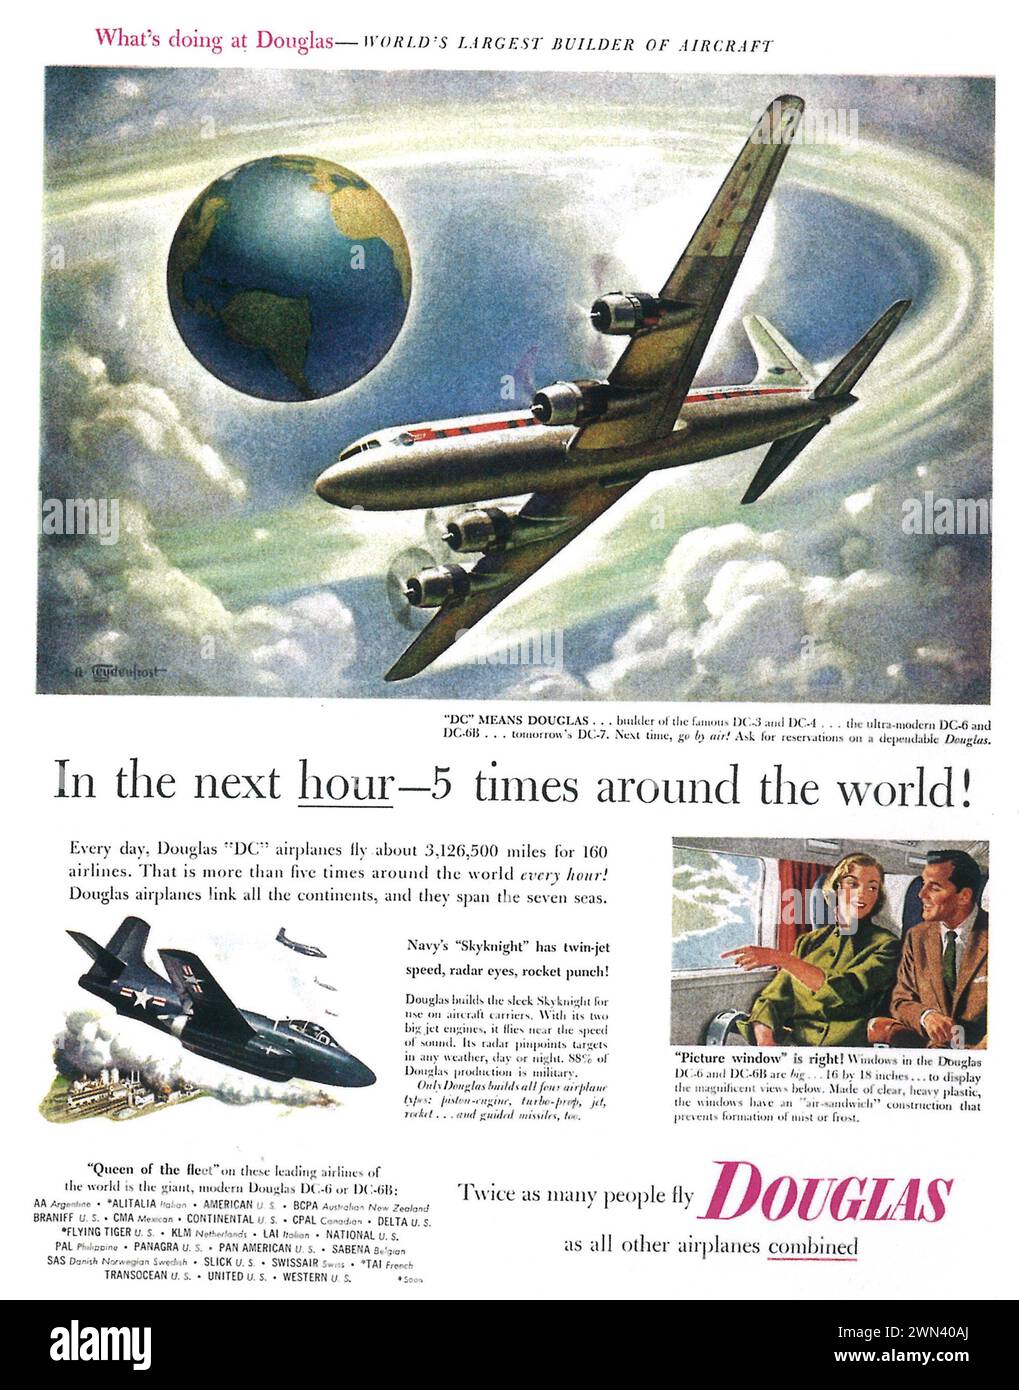 1953 Douglas aircraft print ad. 'World's largest builder of aircraft.' Stock Photo